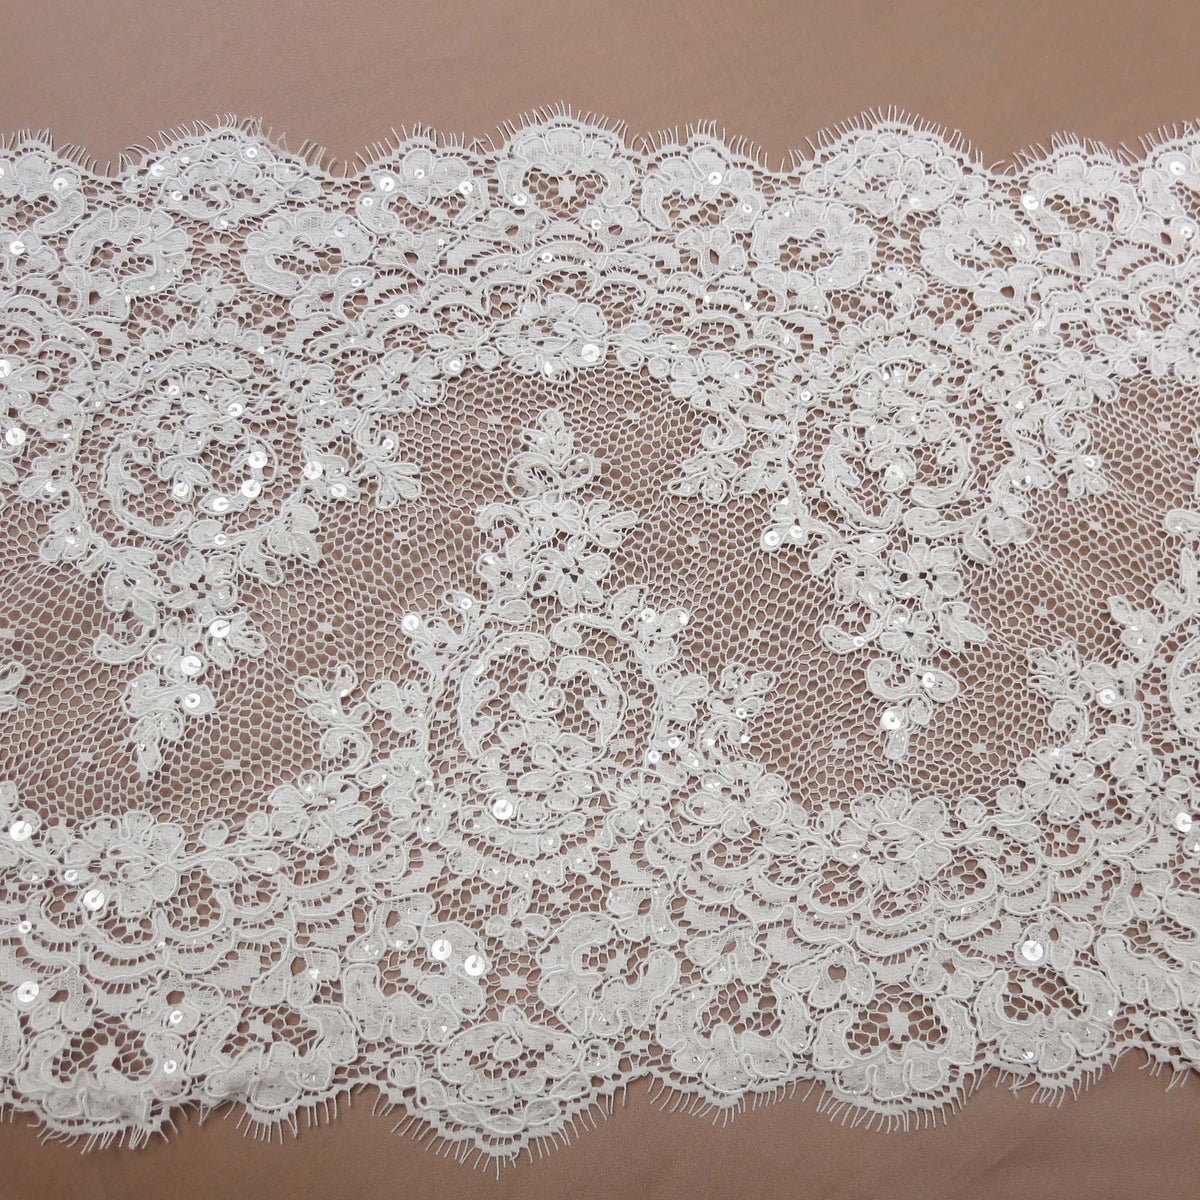 Vintage Corded Lace White